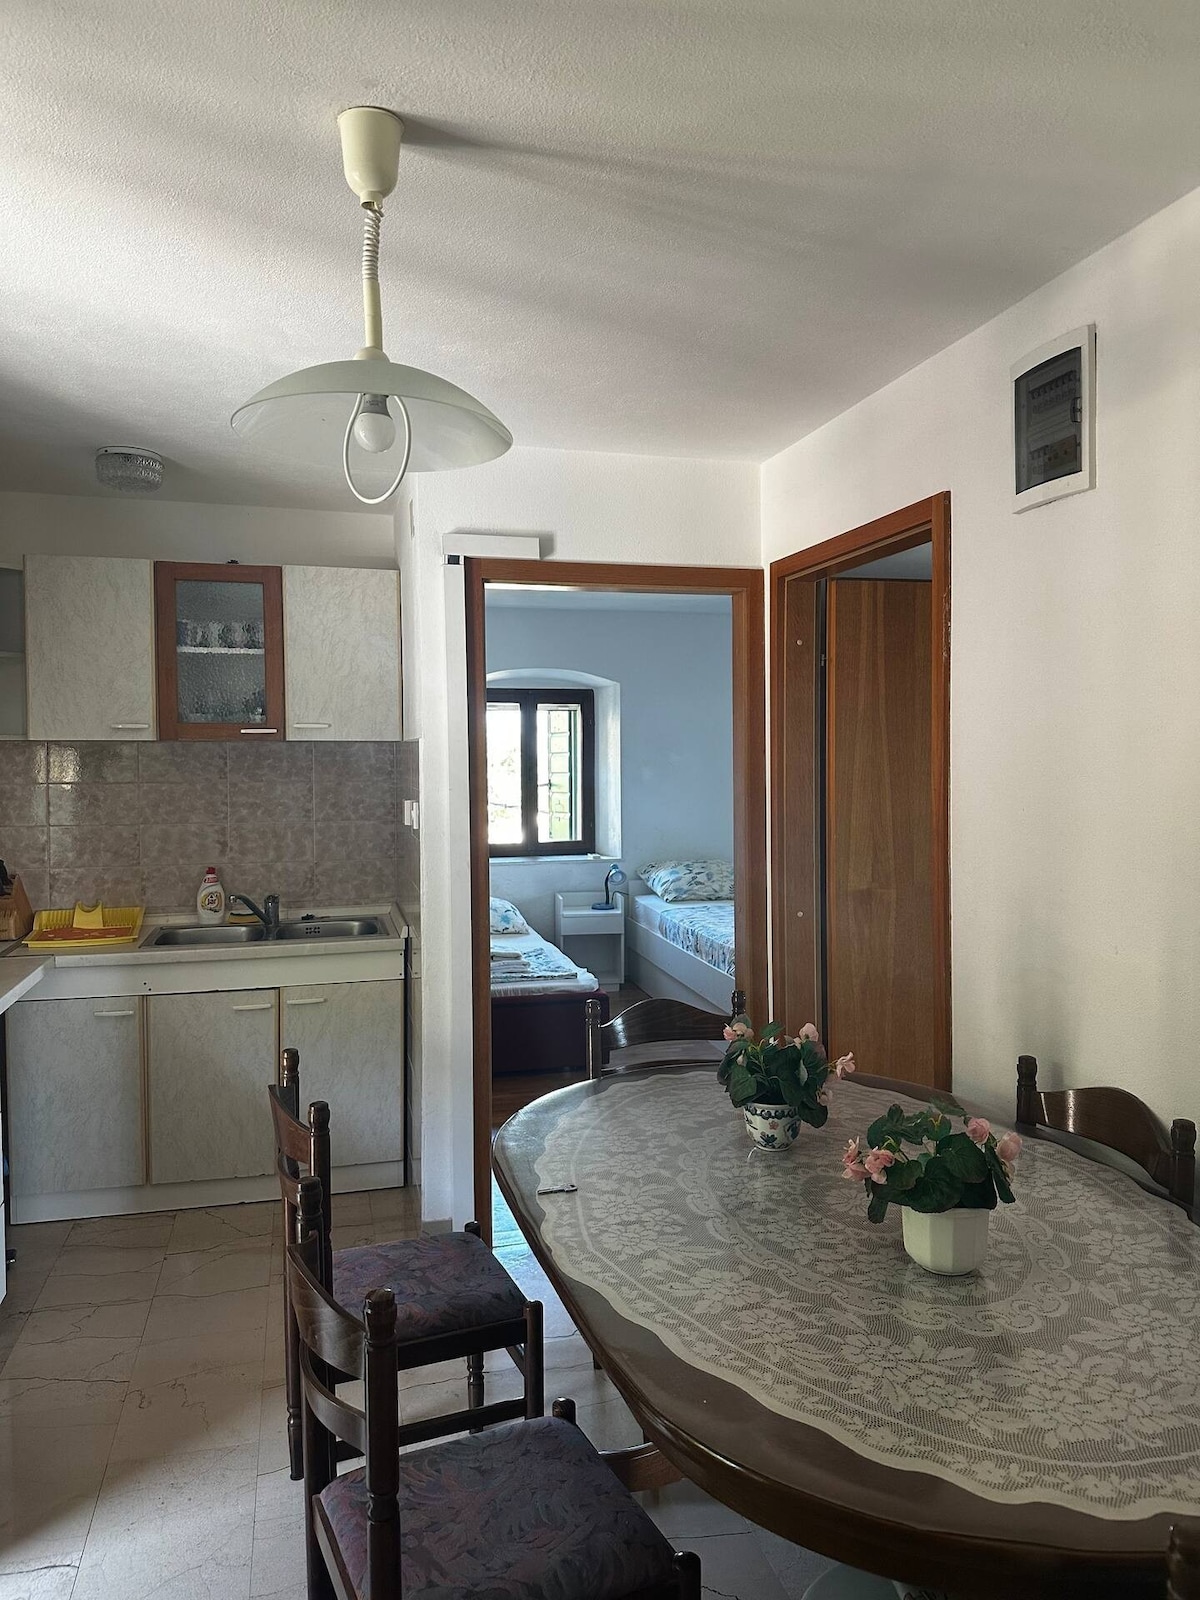 A-22780-a Three bedroom apartment with terrace and